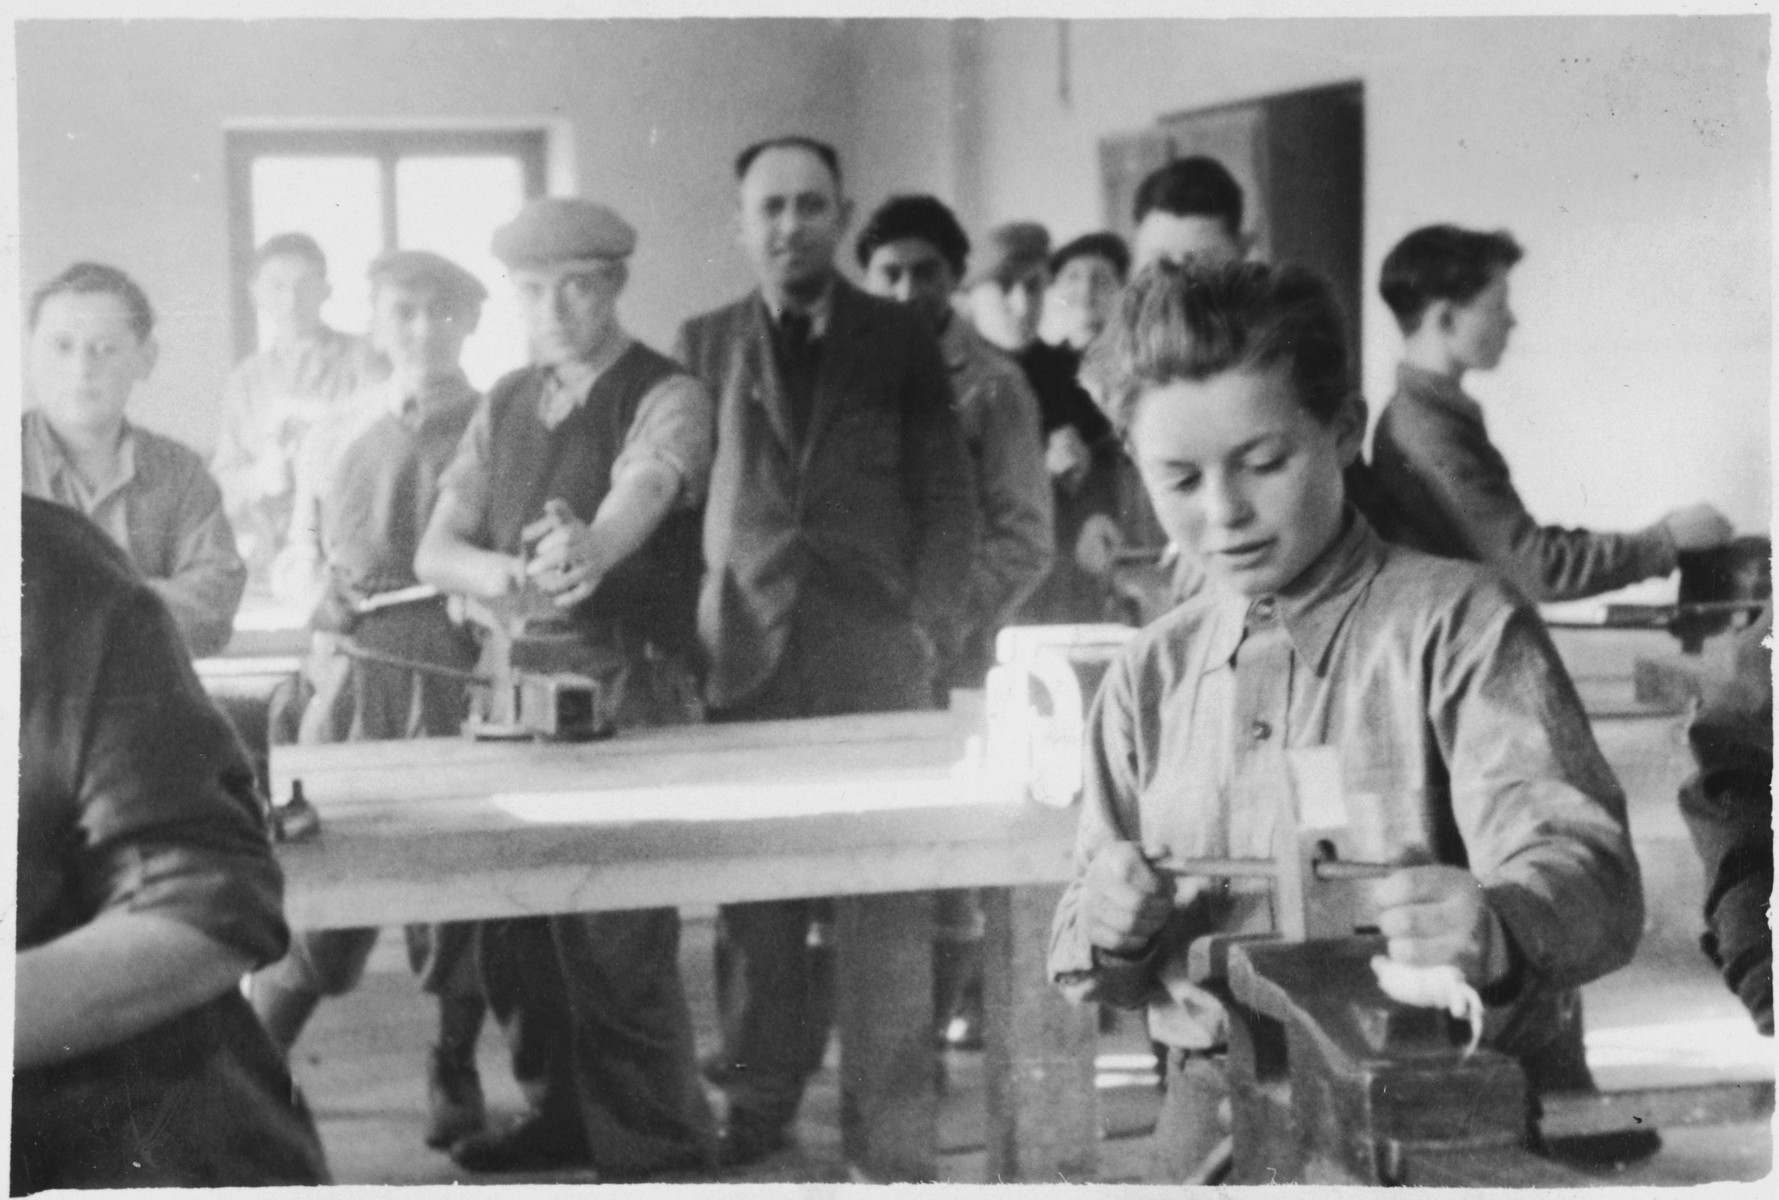 Jewish men and youth practice carpentry in a vocational workshop (probably in the Foehrenwald displaced persons camp).